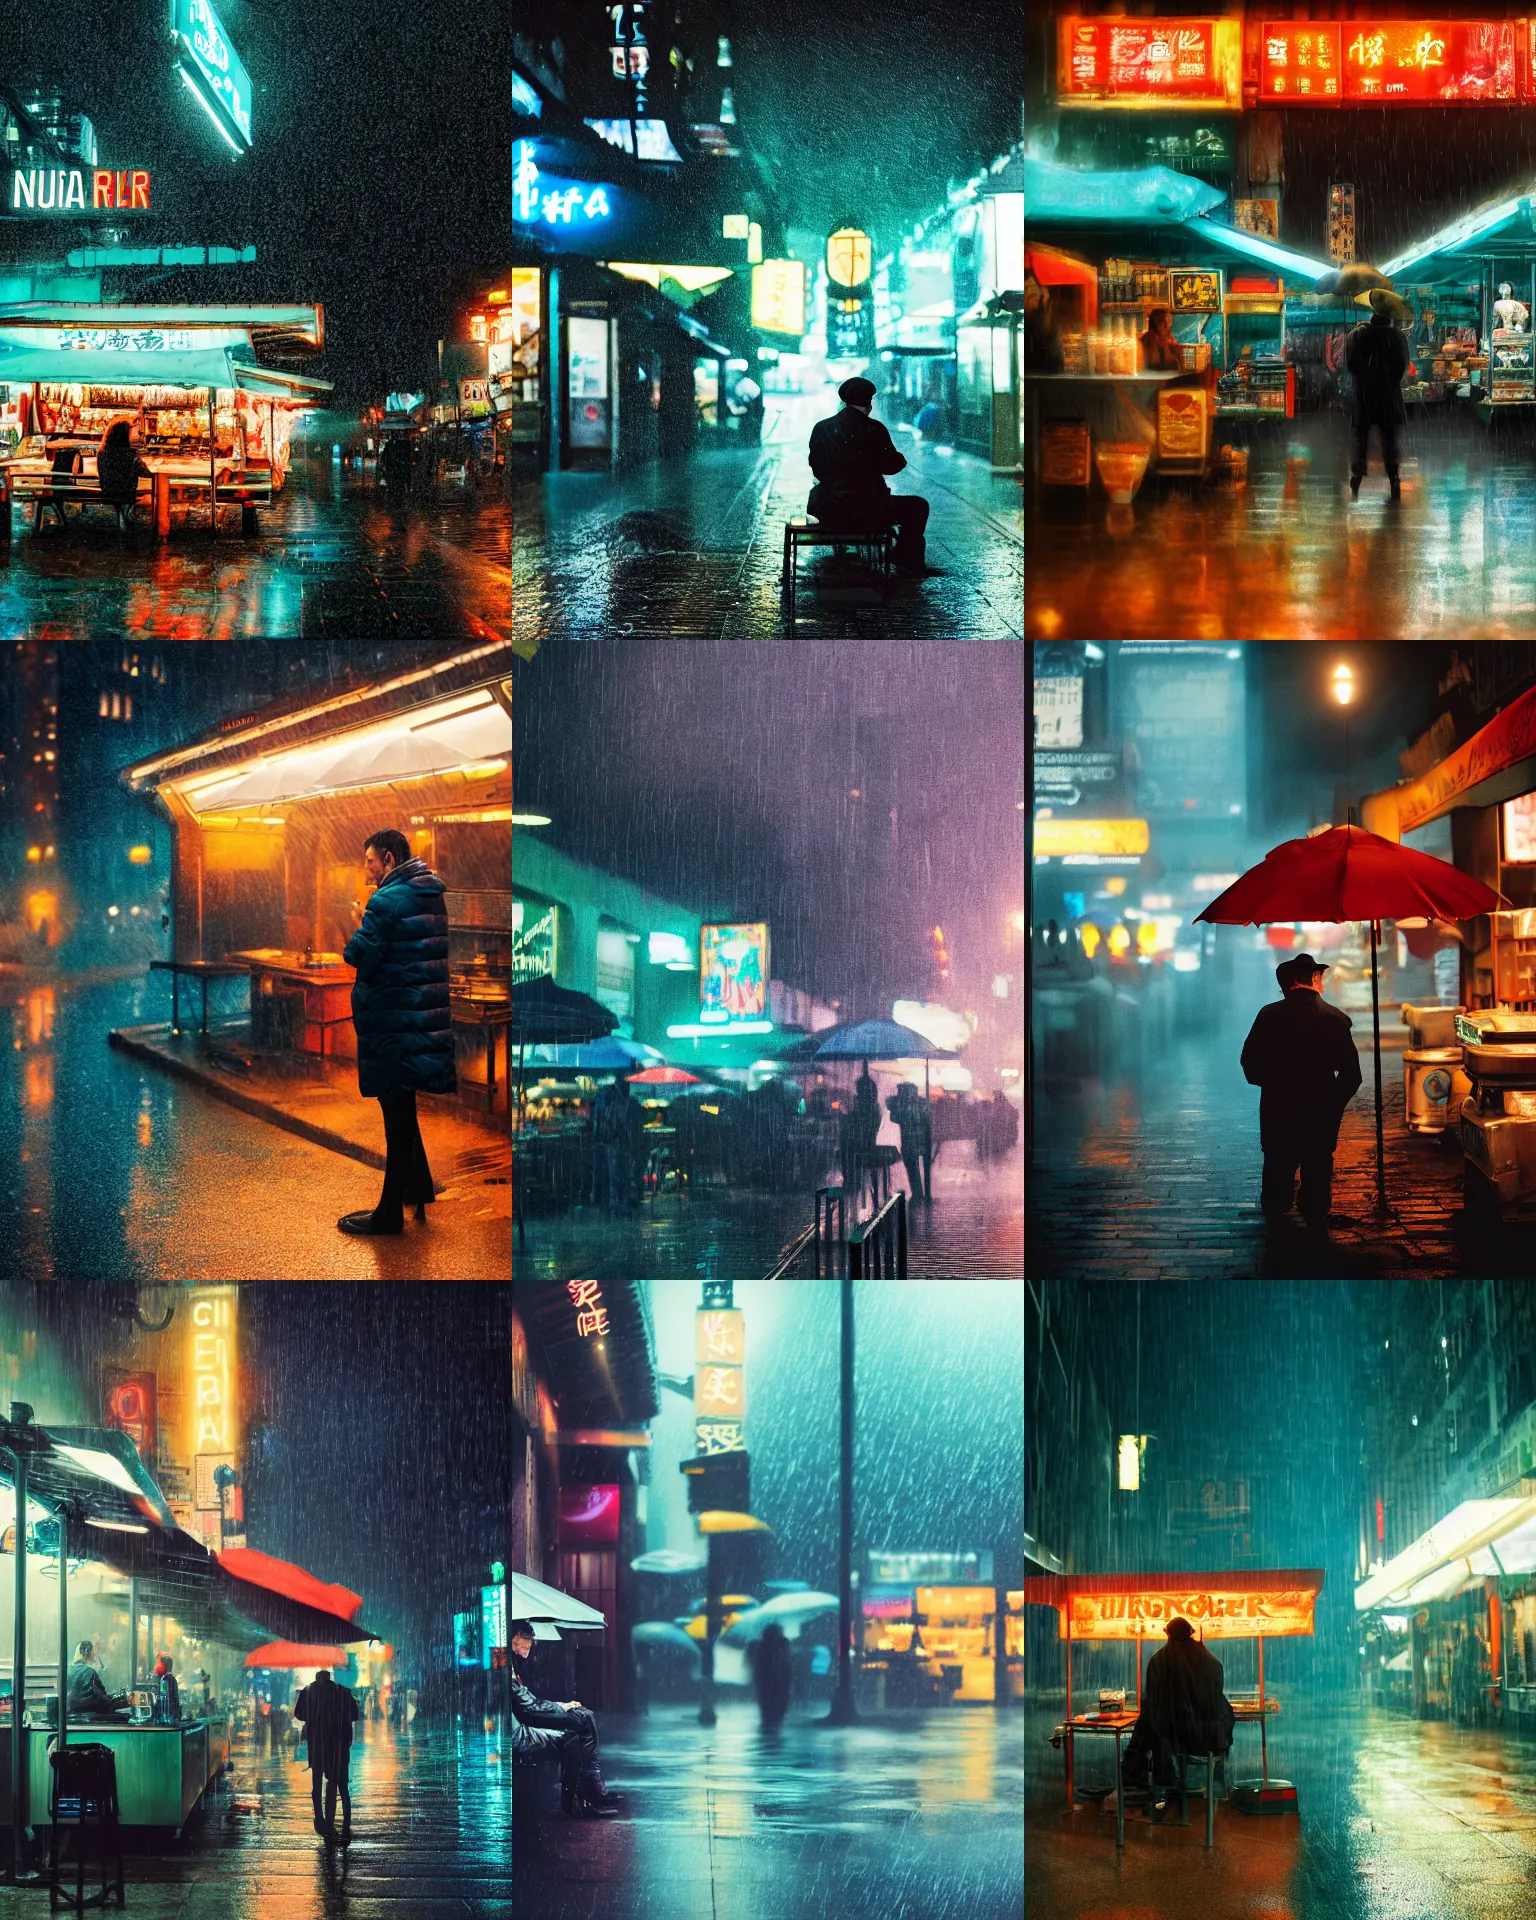 Prompt: blade runner movie still of a customer sitting at an outdoor noodle stand, hyper realism, rack focus, close establishing shot, rainy night, monochromatic teal, steamy, desaturated colors, soft dramatic lighting, 4 k digital camera